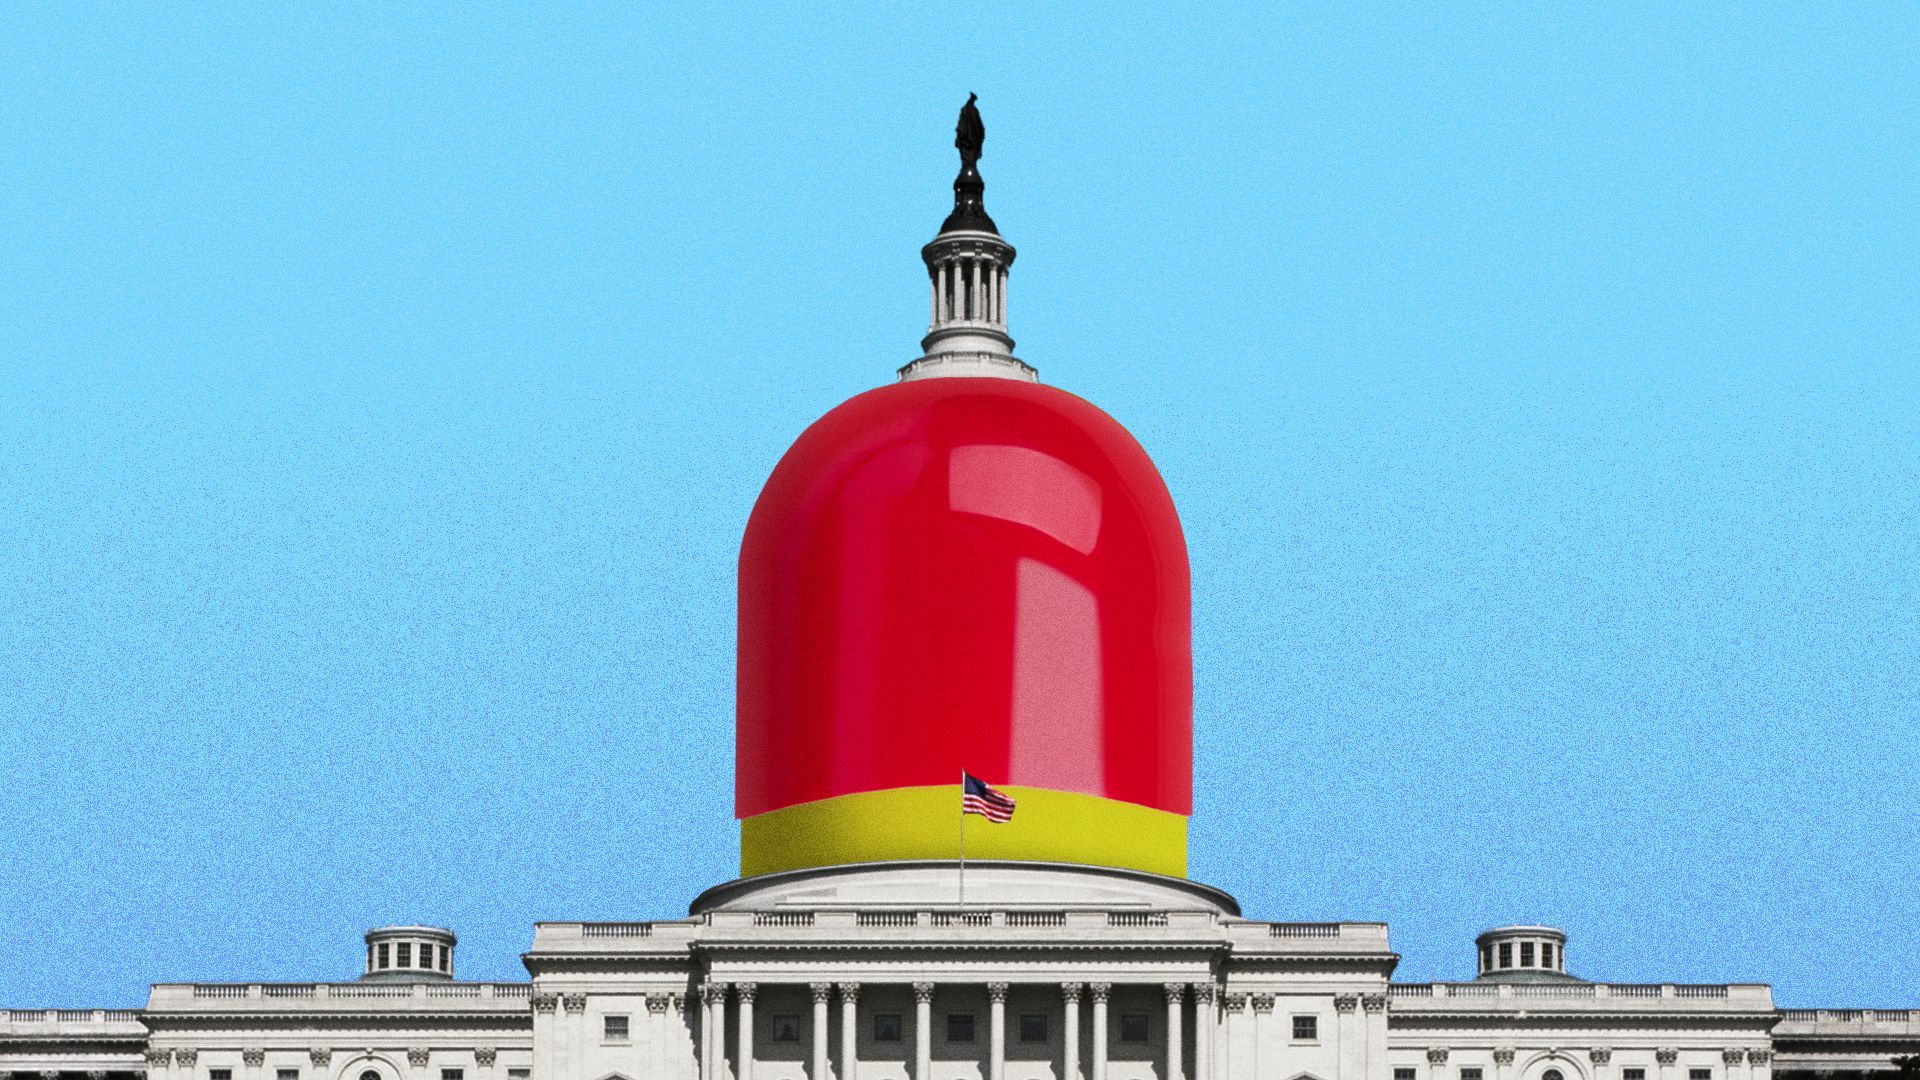 Illustration with the dome of the U.S. Capitol building replaced with a red and yellow pill capsule.